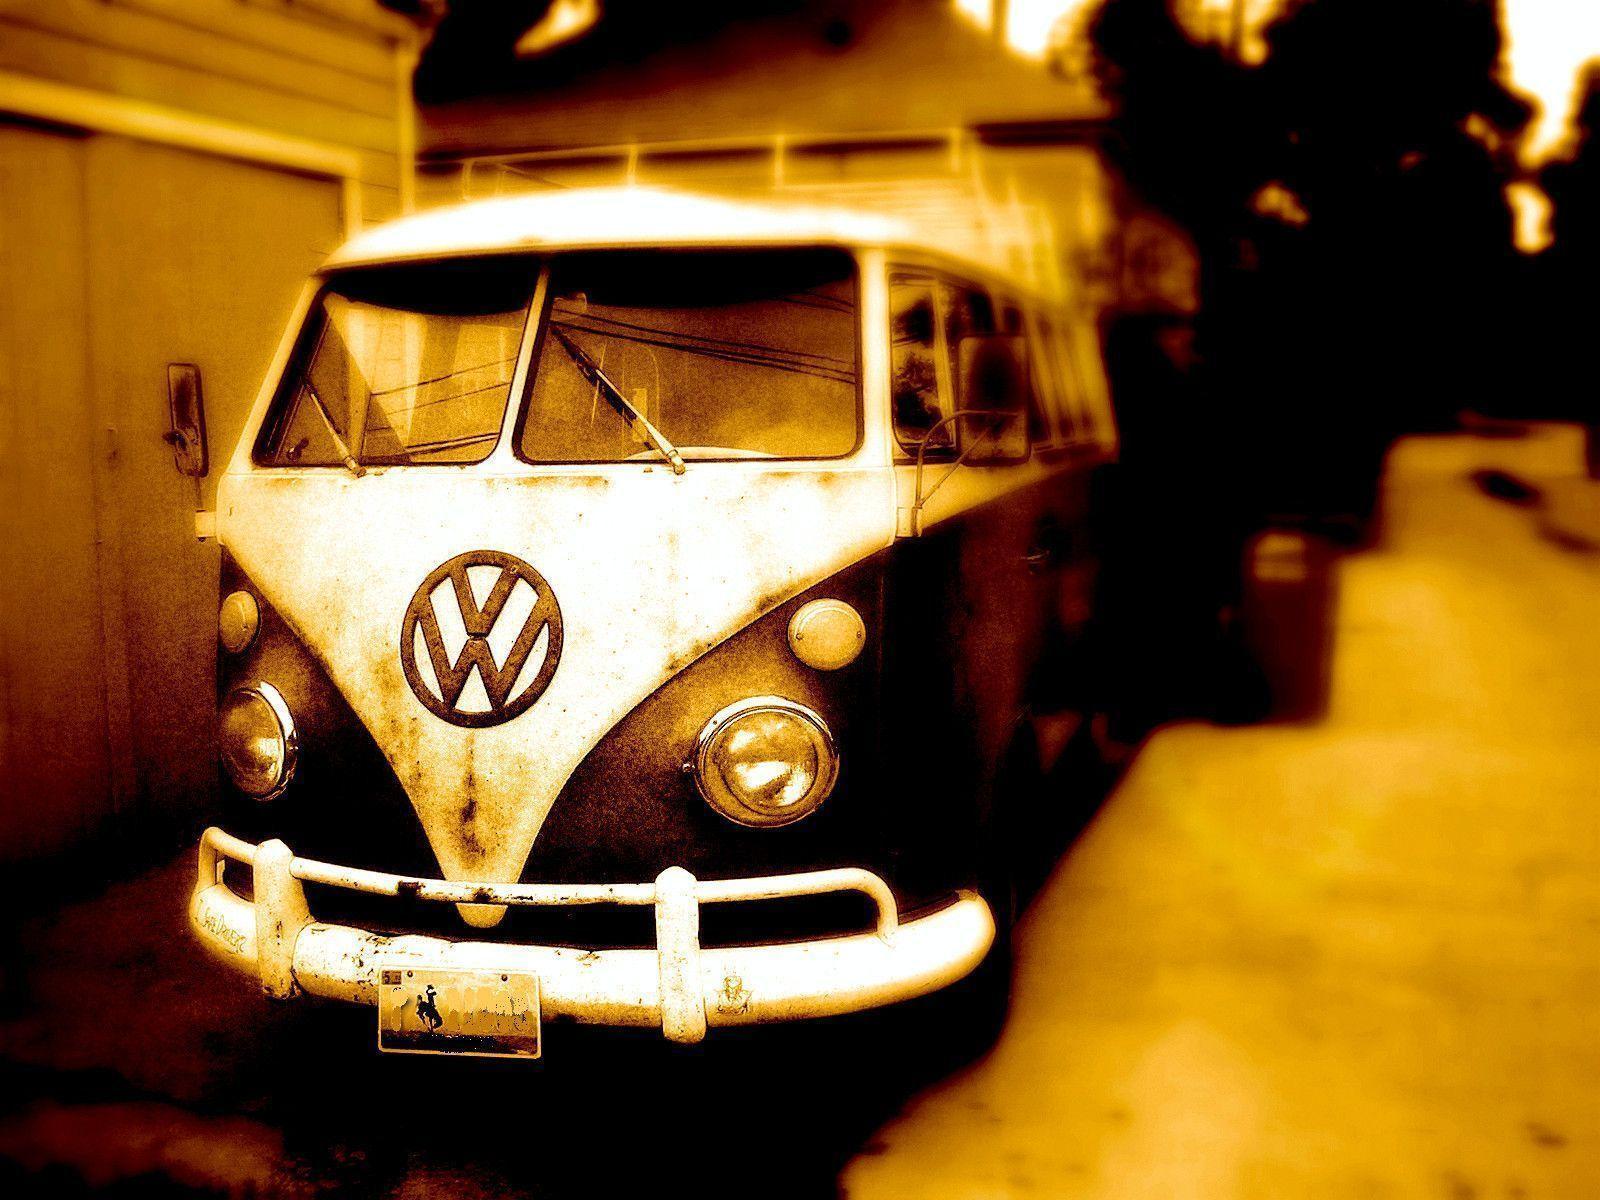 Vw Bus Wallpaper. Daily inspiration art photo, picture